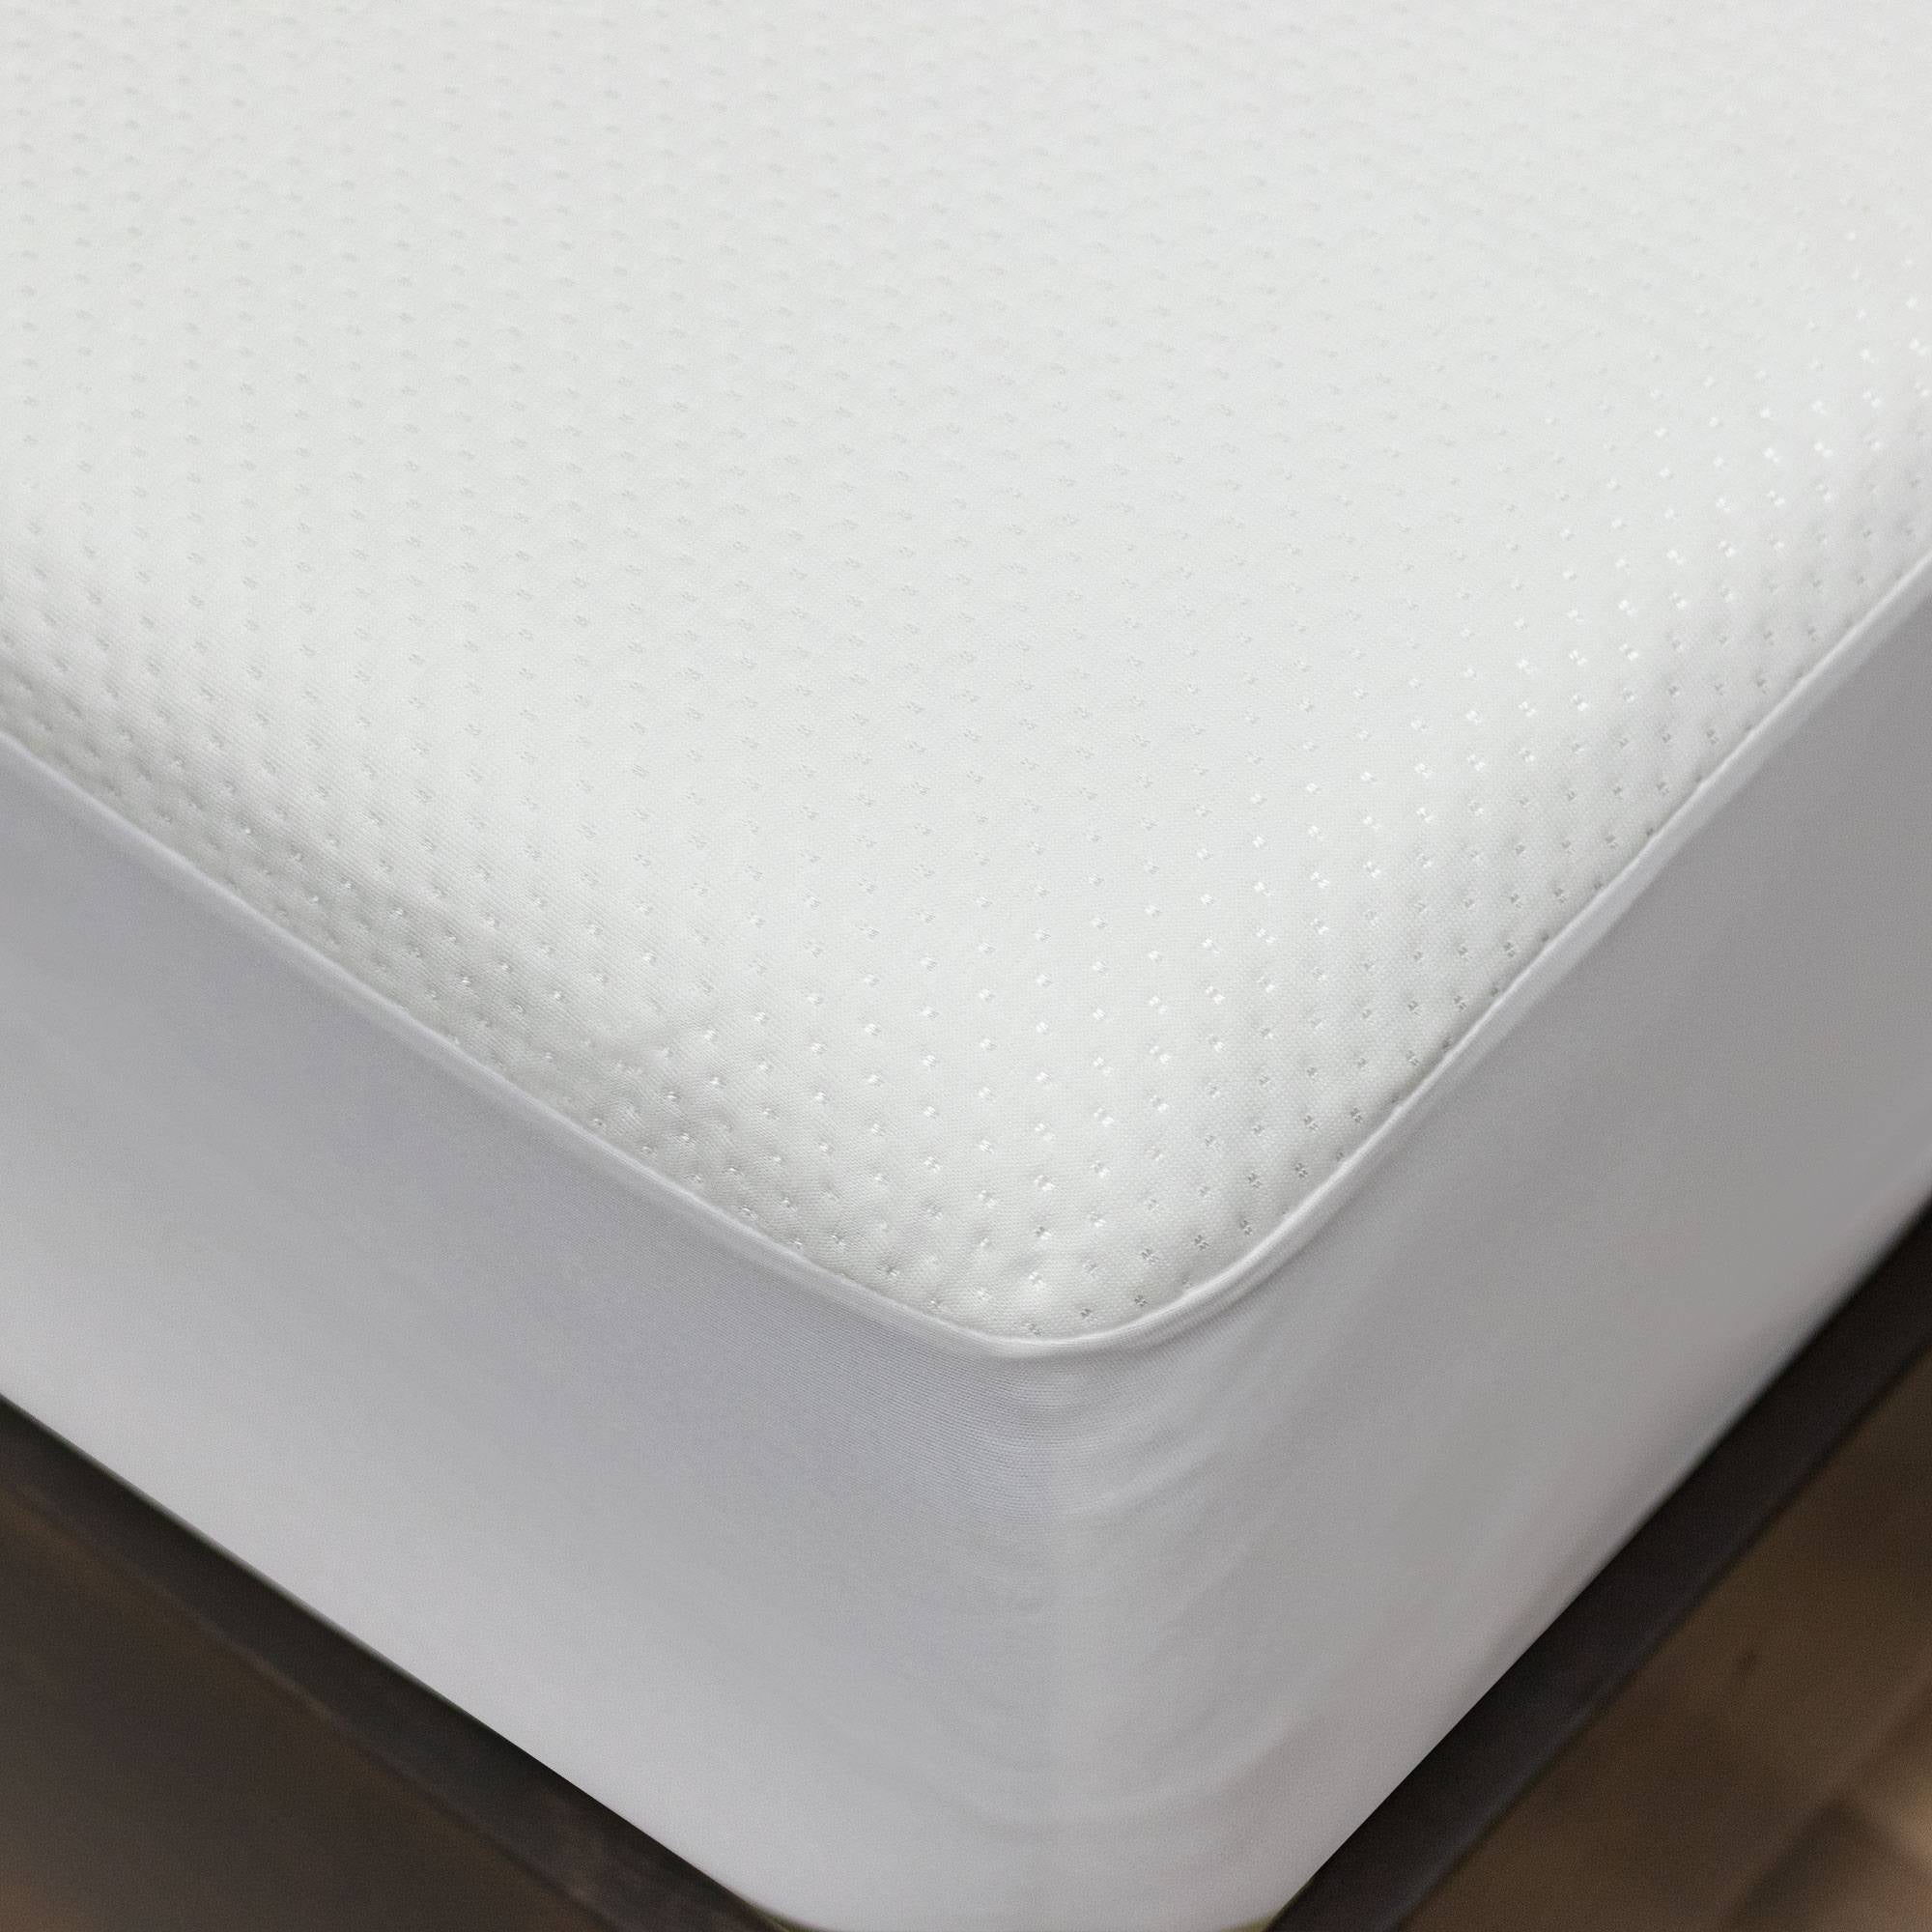 MarCielo 100% Waterproof Knit Mattress Protector Stretch Up to 21